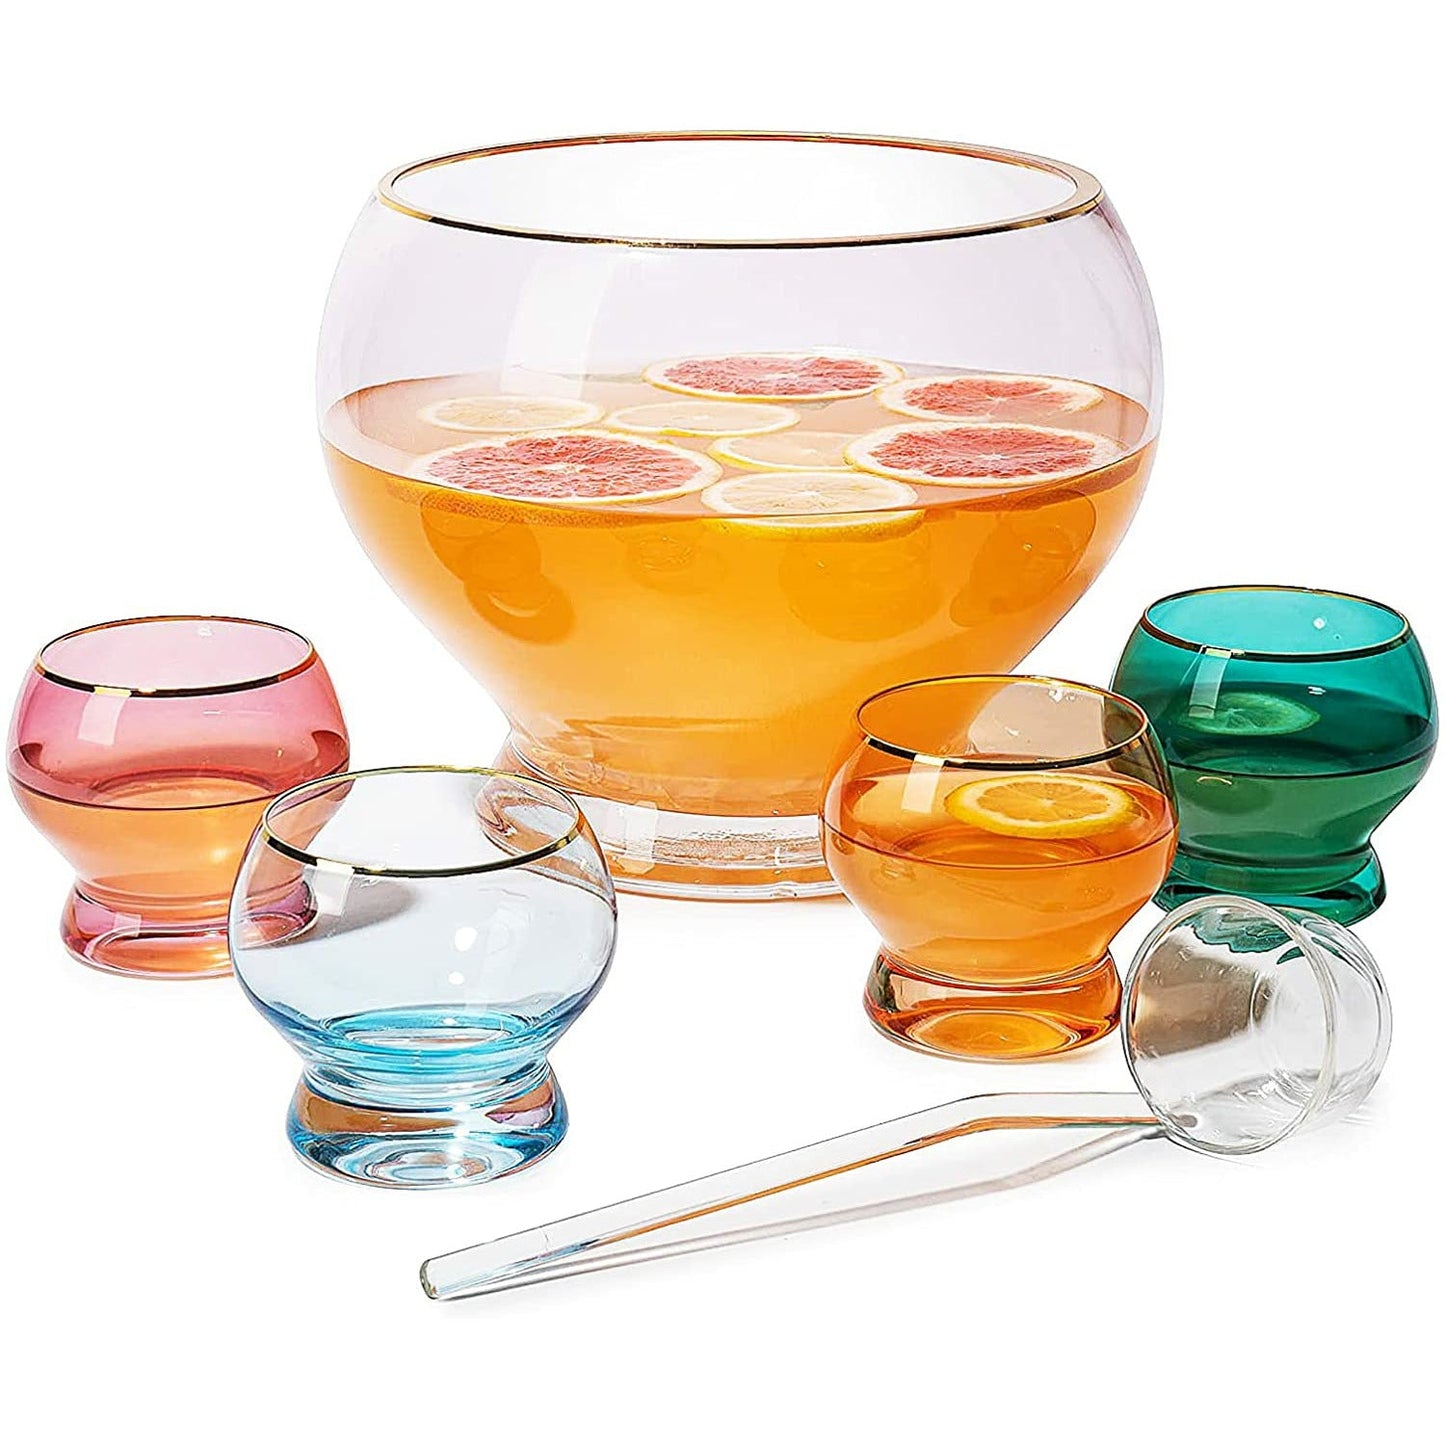 Colorful 3 Gallon Punch Bowl with 4 10oz Glasses Set & Ladle - by The Wine Savant